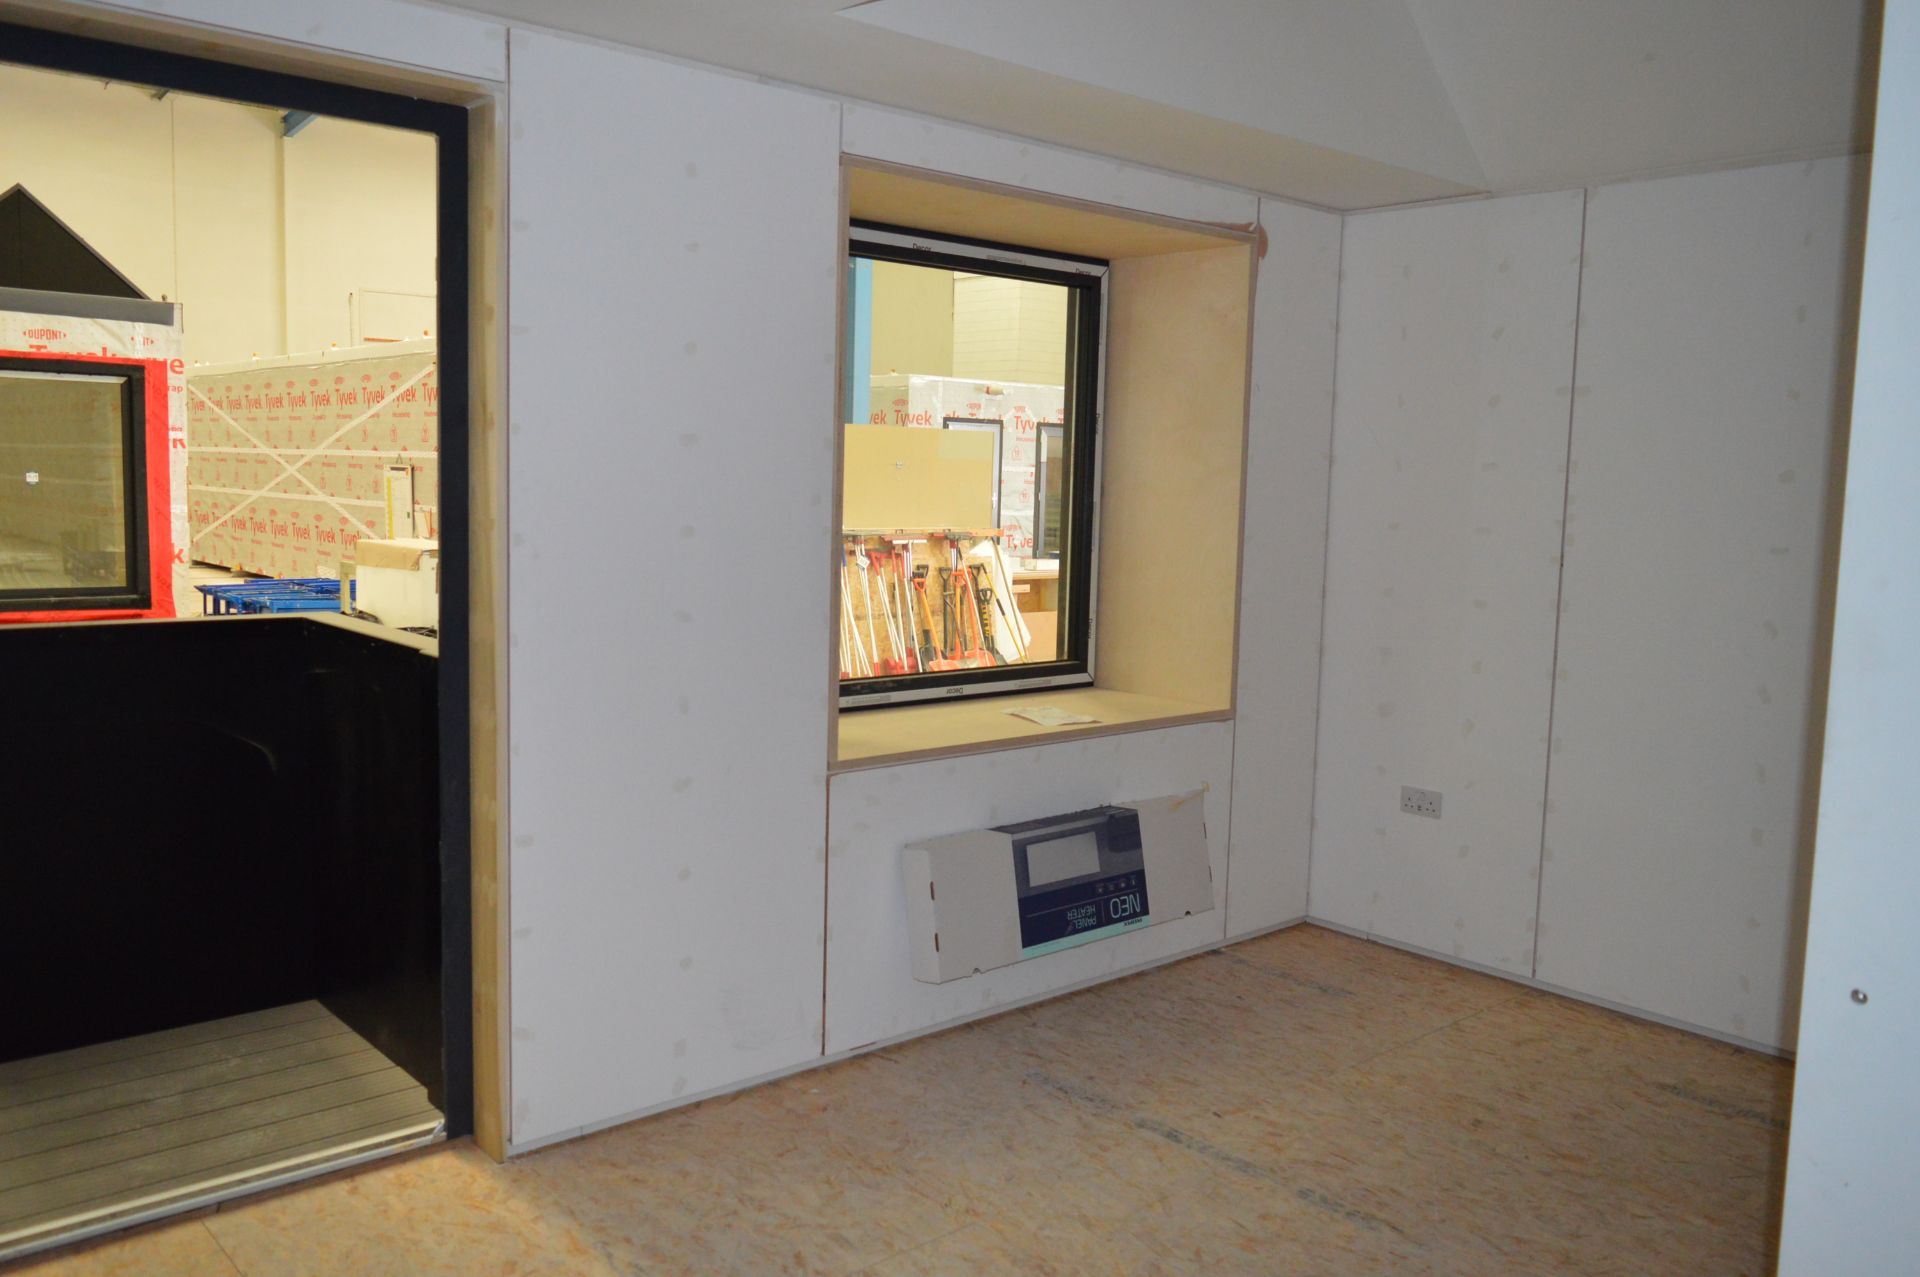 Housing pod with two bedrooms, fitted bathroom, water heater, heaters and balcony, approx. 10.7m x - Image 4 of 7